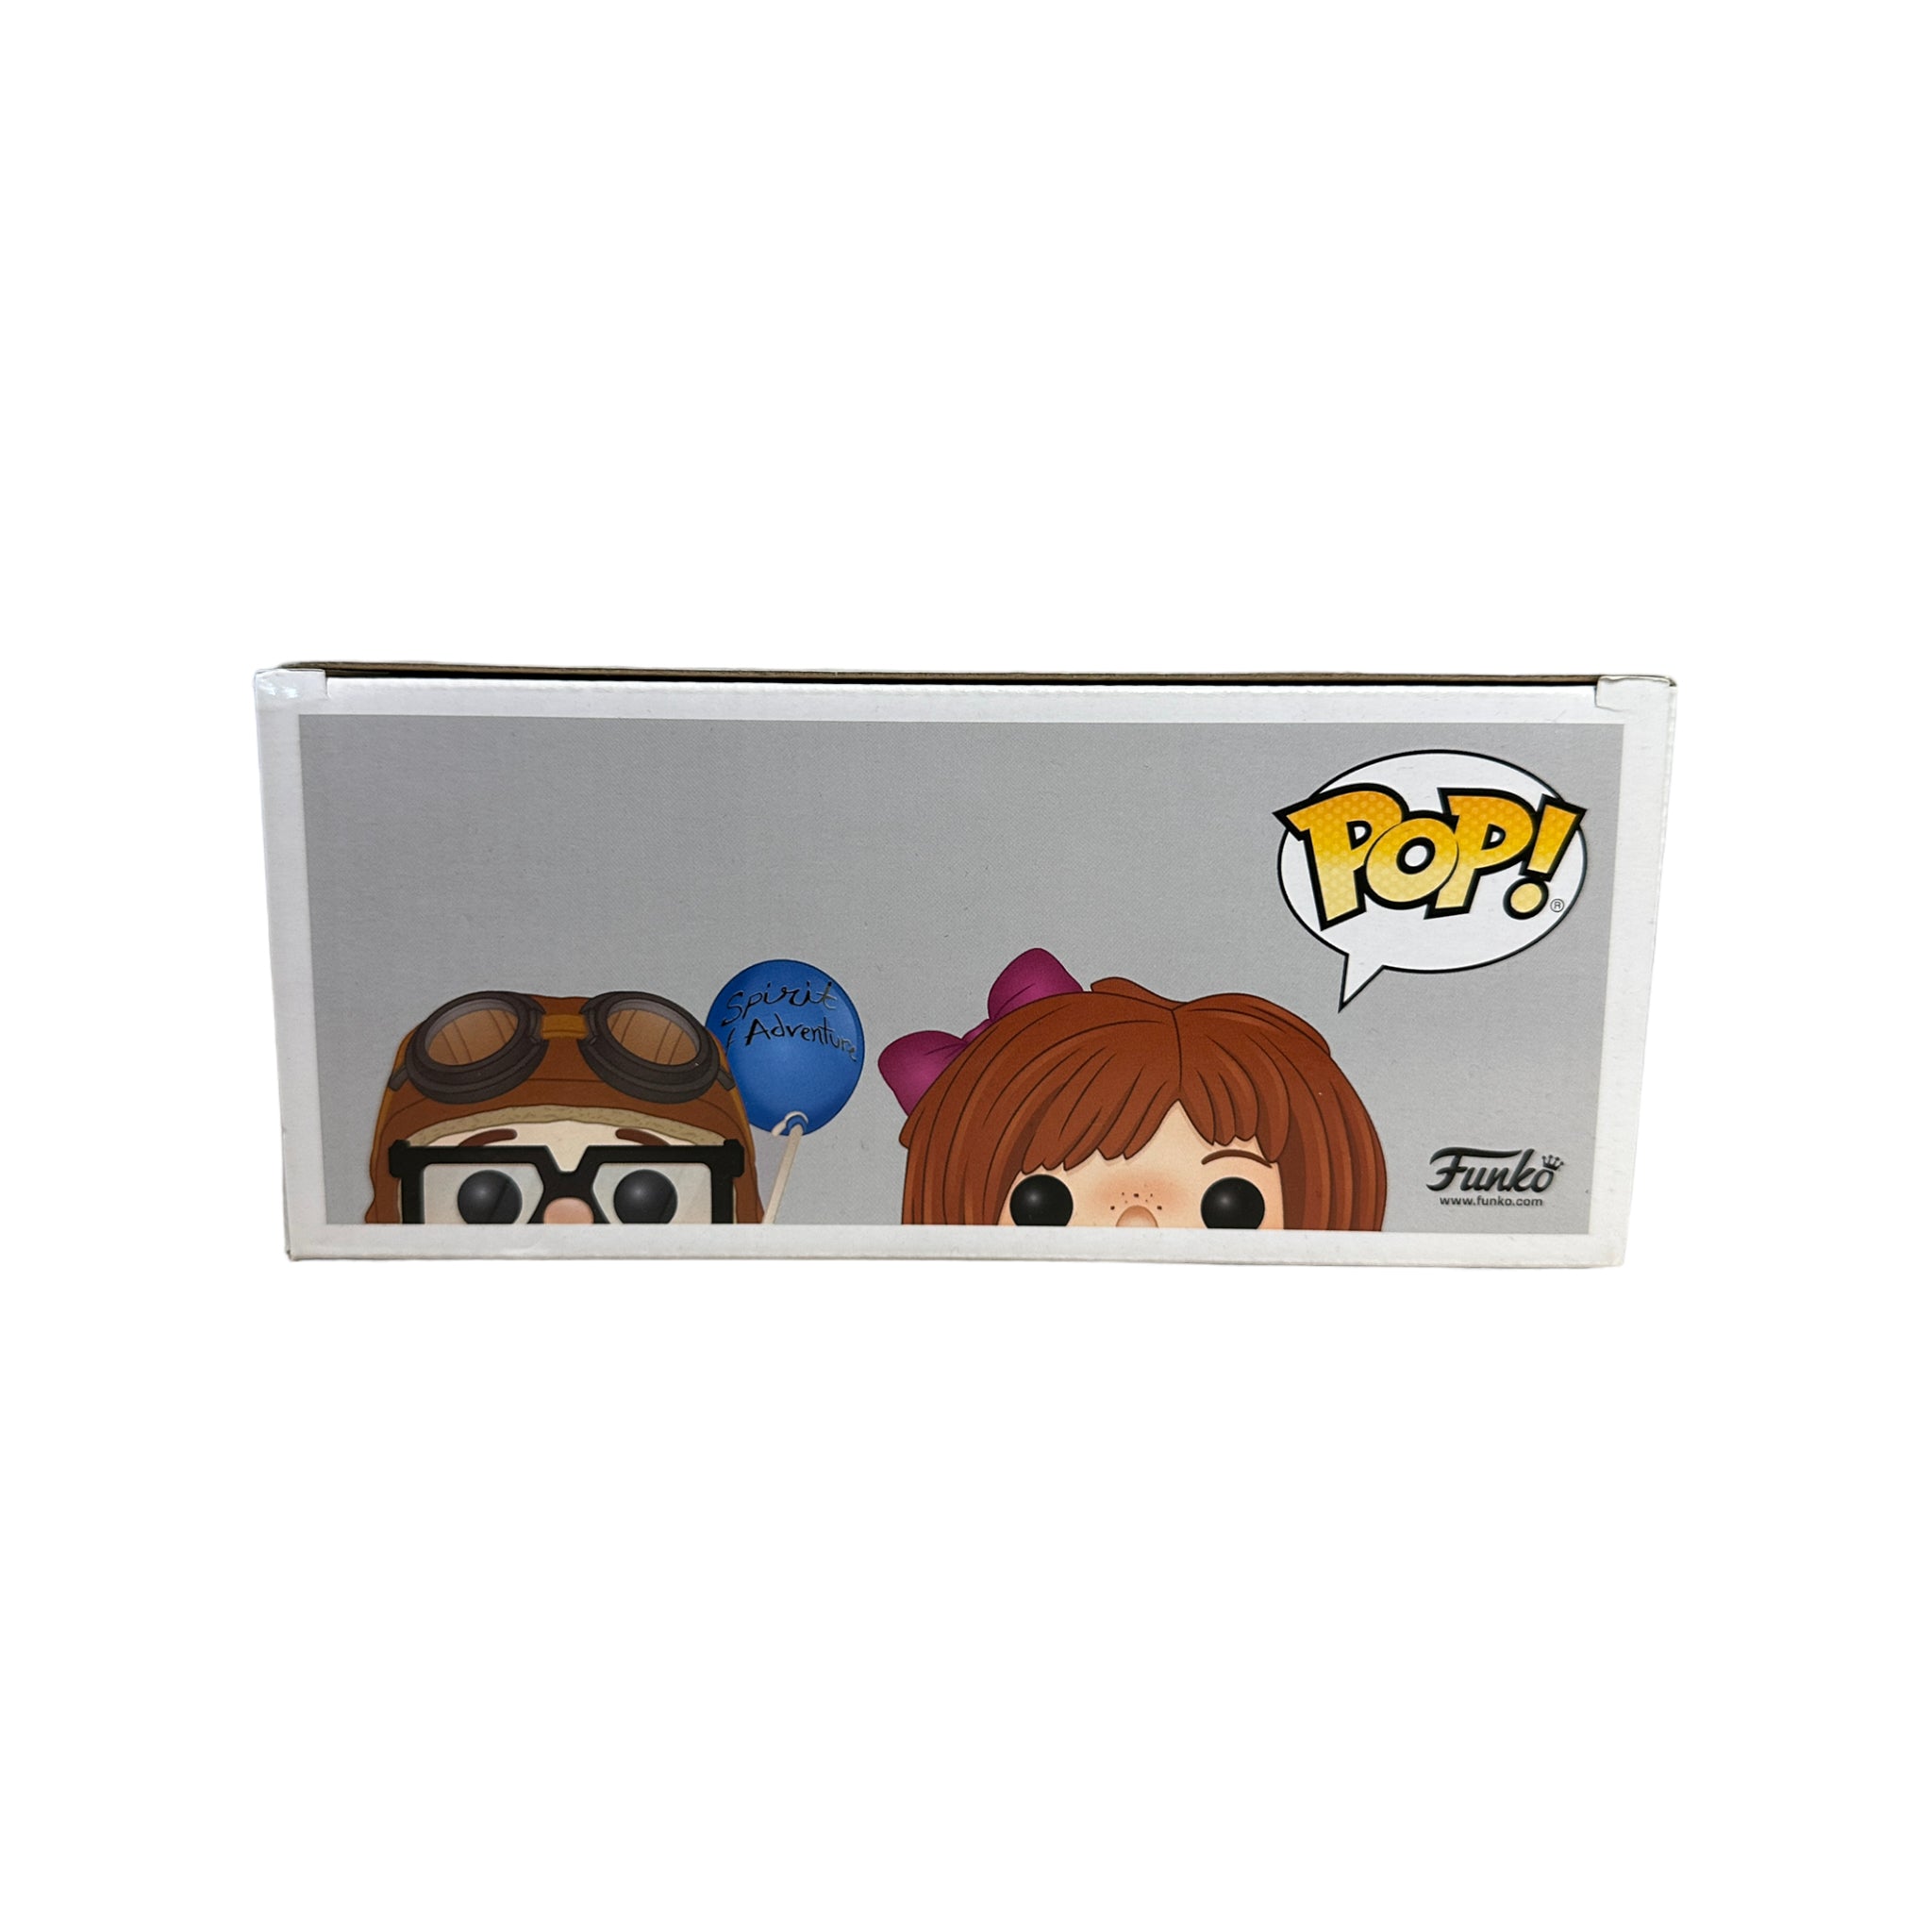 Carl & Ellie 2 Pack Funko Pop! - UP - SDCC 2019 Official Convention Exclusive - Condition 8.75/10